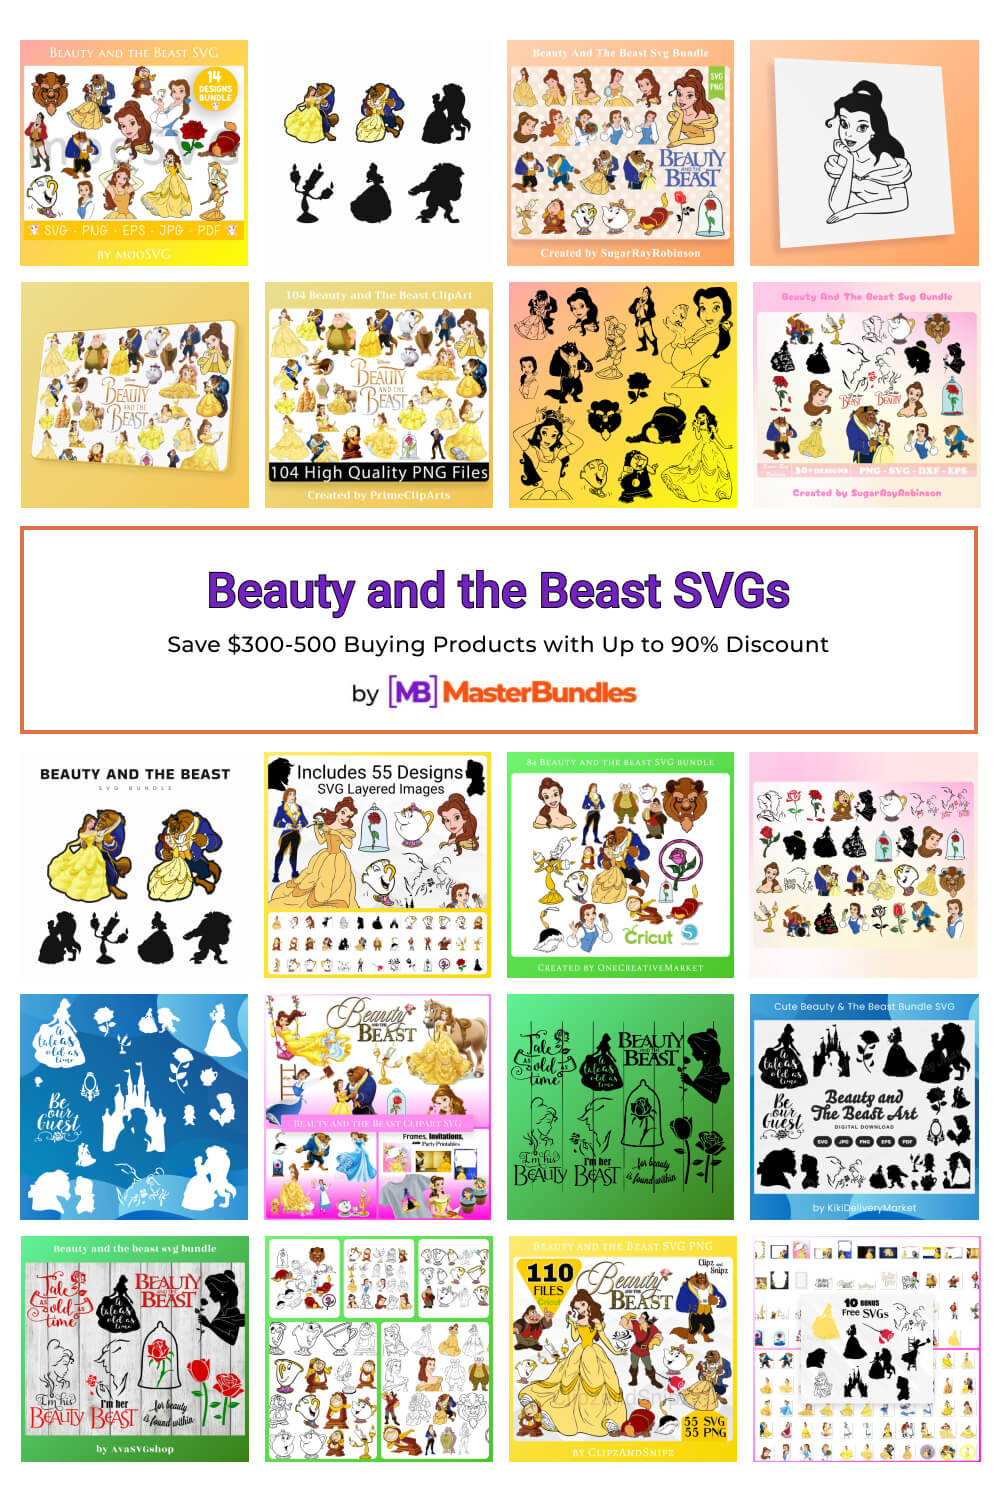 beauty and the beast svgs pinterest image.